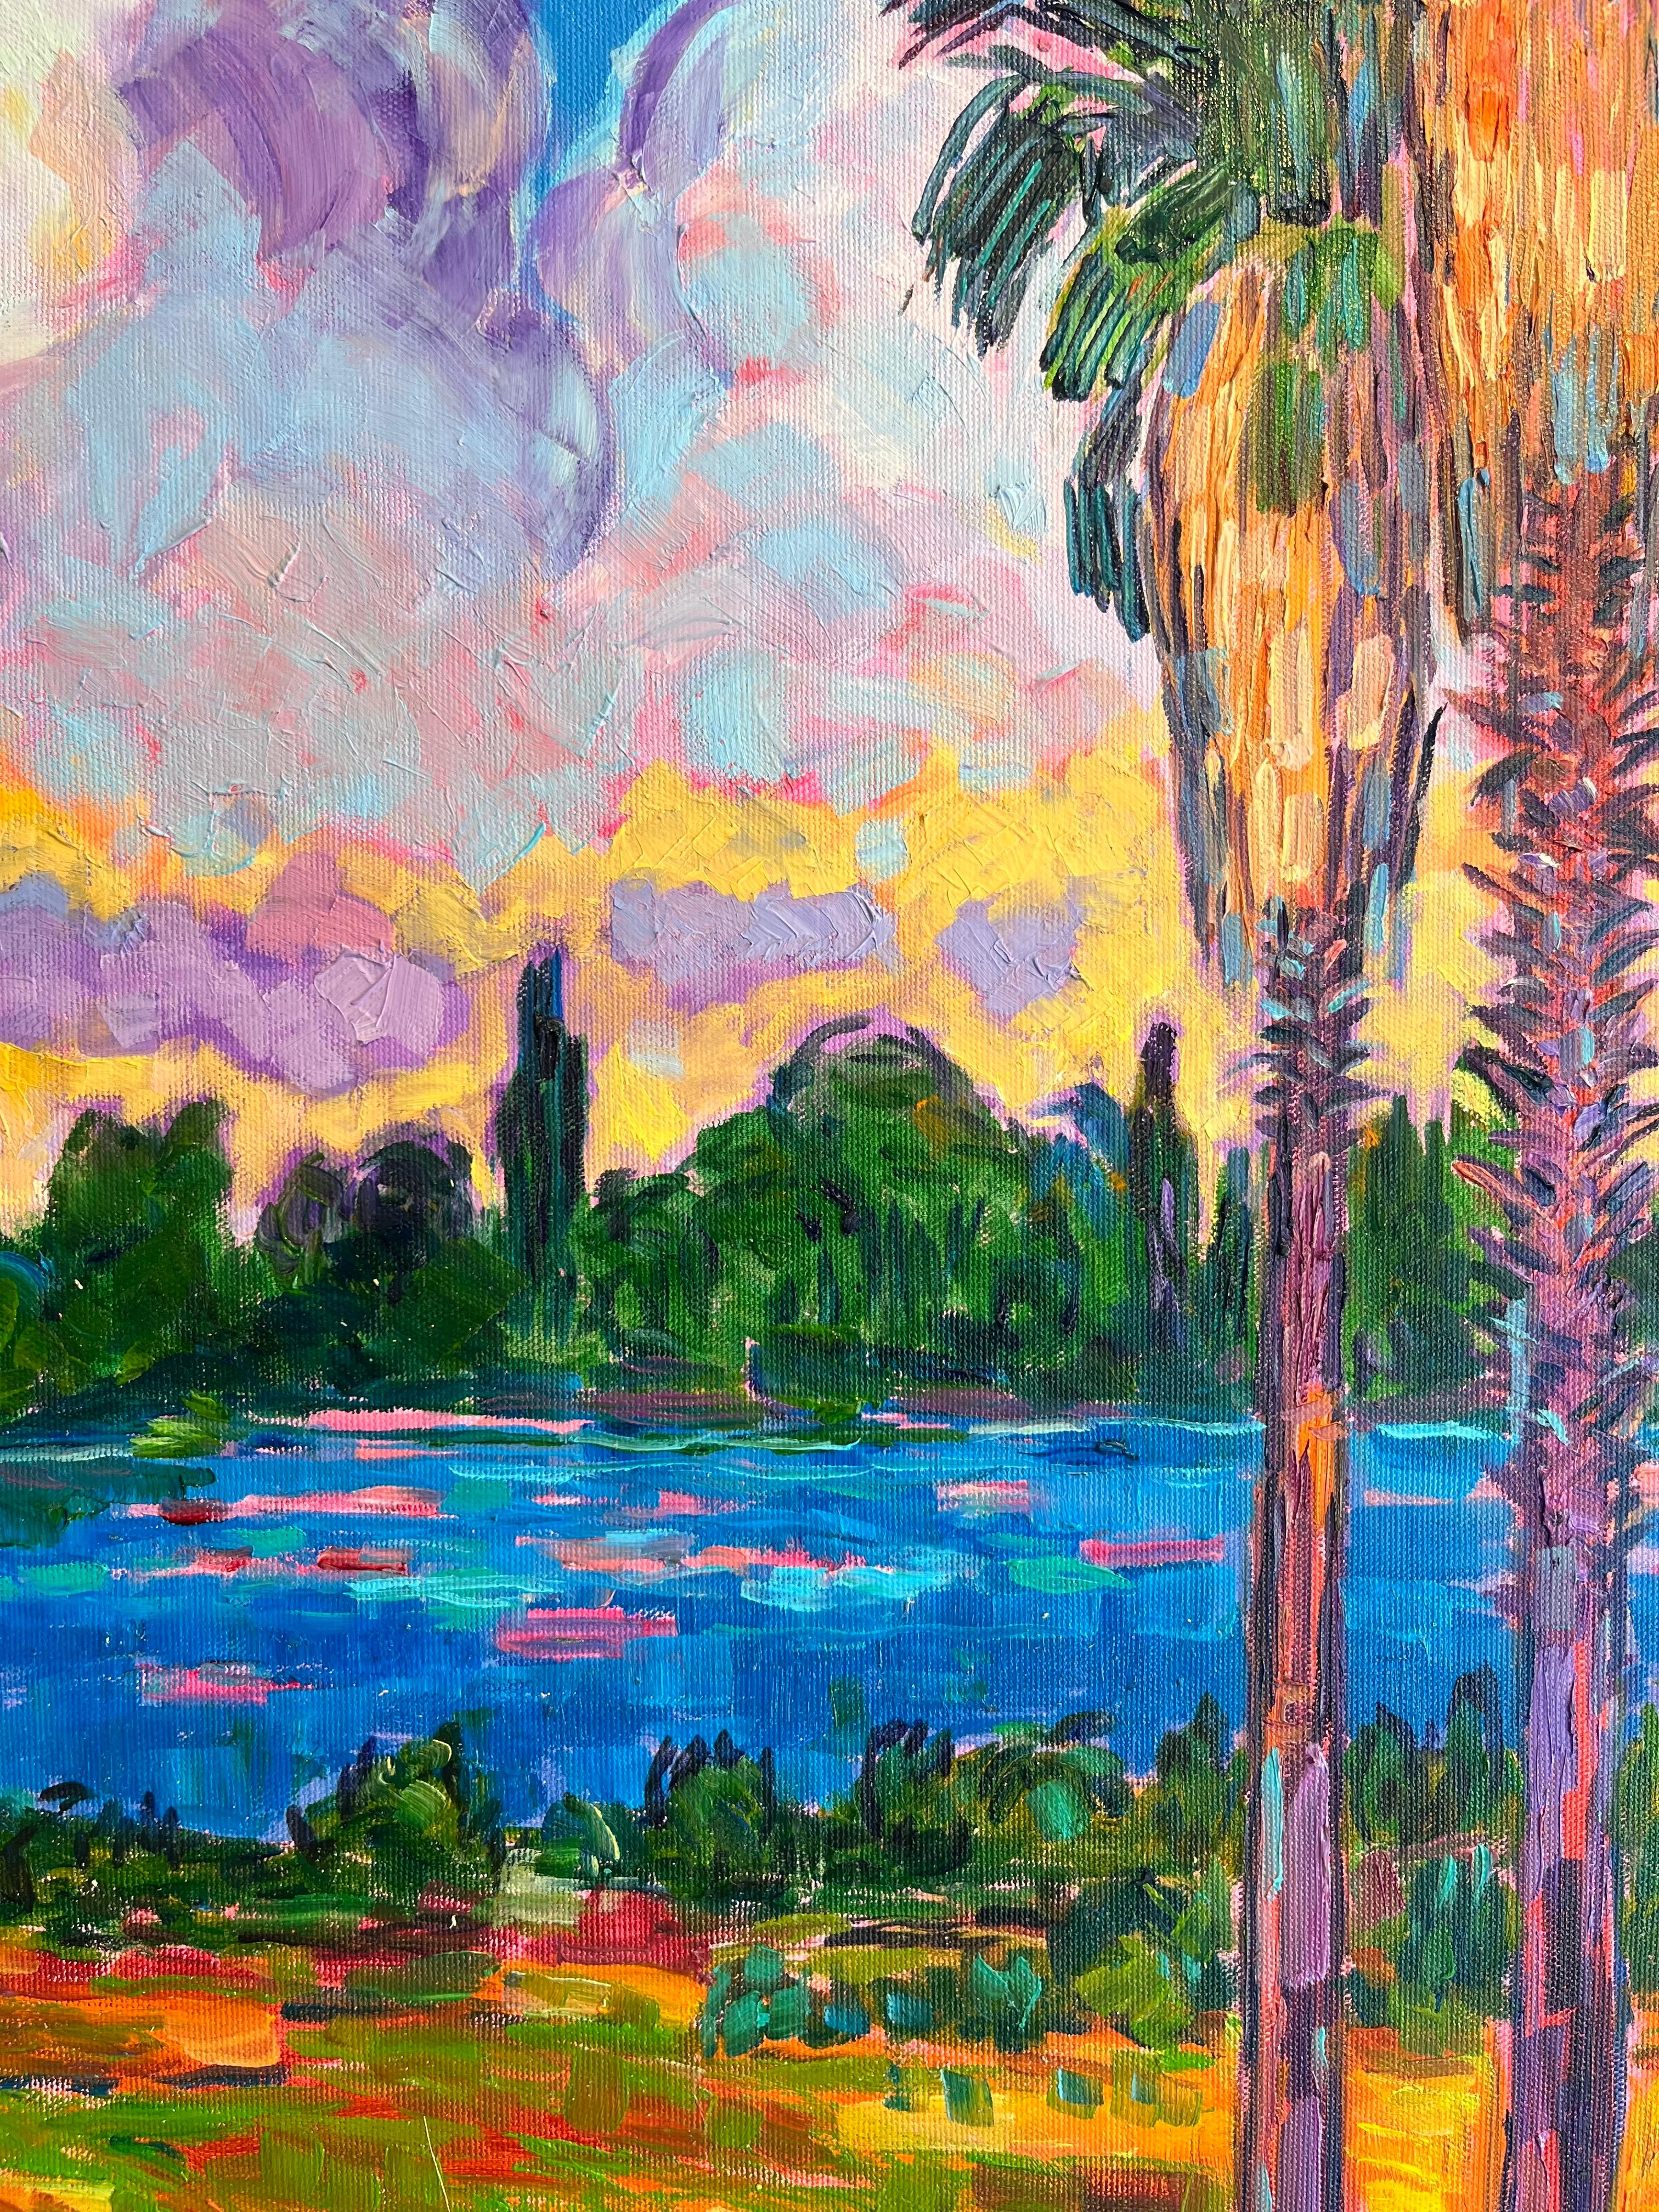 Palm trees by the River side & Sunset-original impressionism landscape painting - Gray Landscape Painting by Nimet Keser